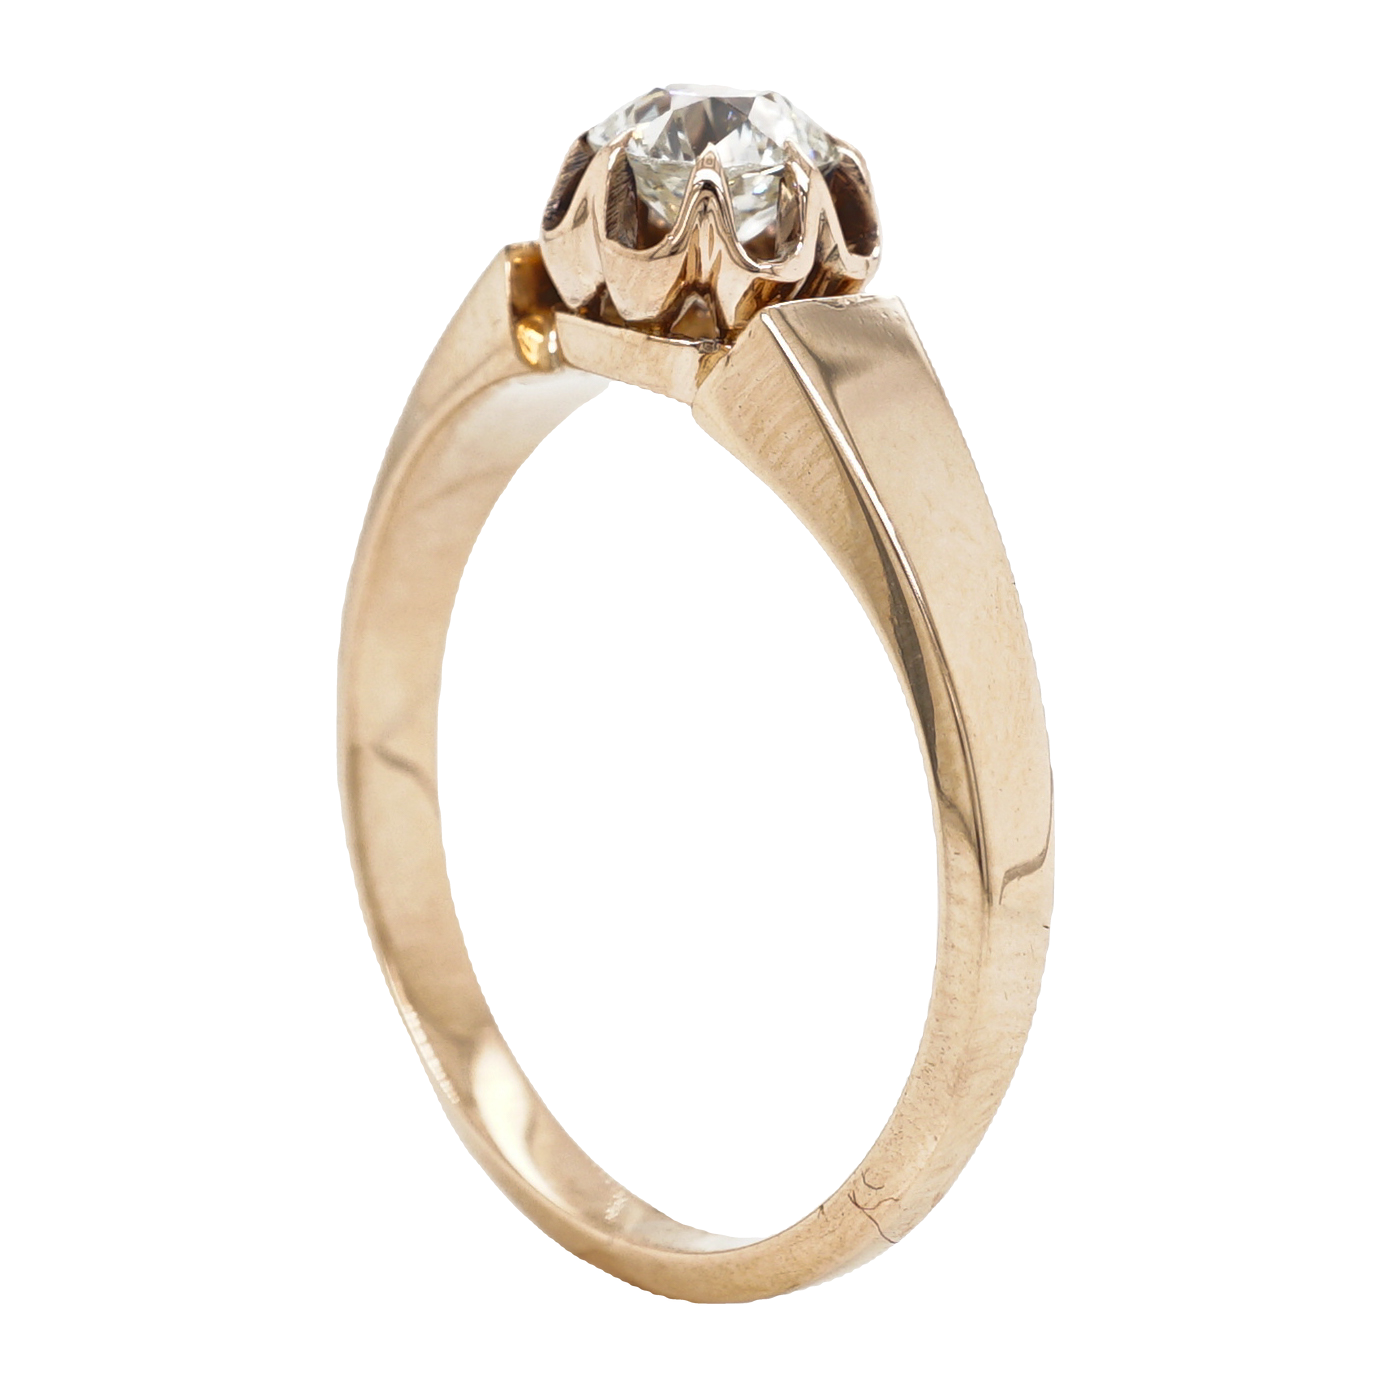 .47 Victorian Diamond Engagement Ring in 14K Rose Gold